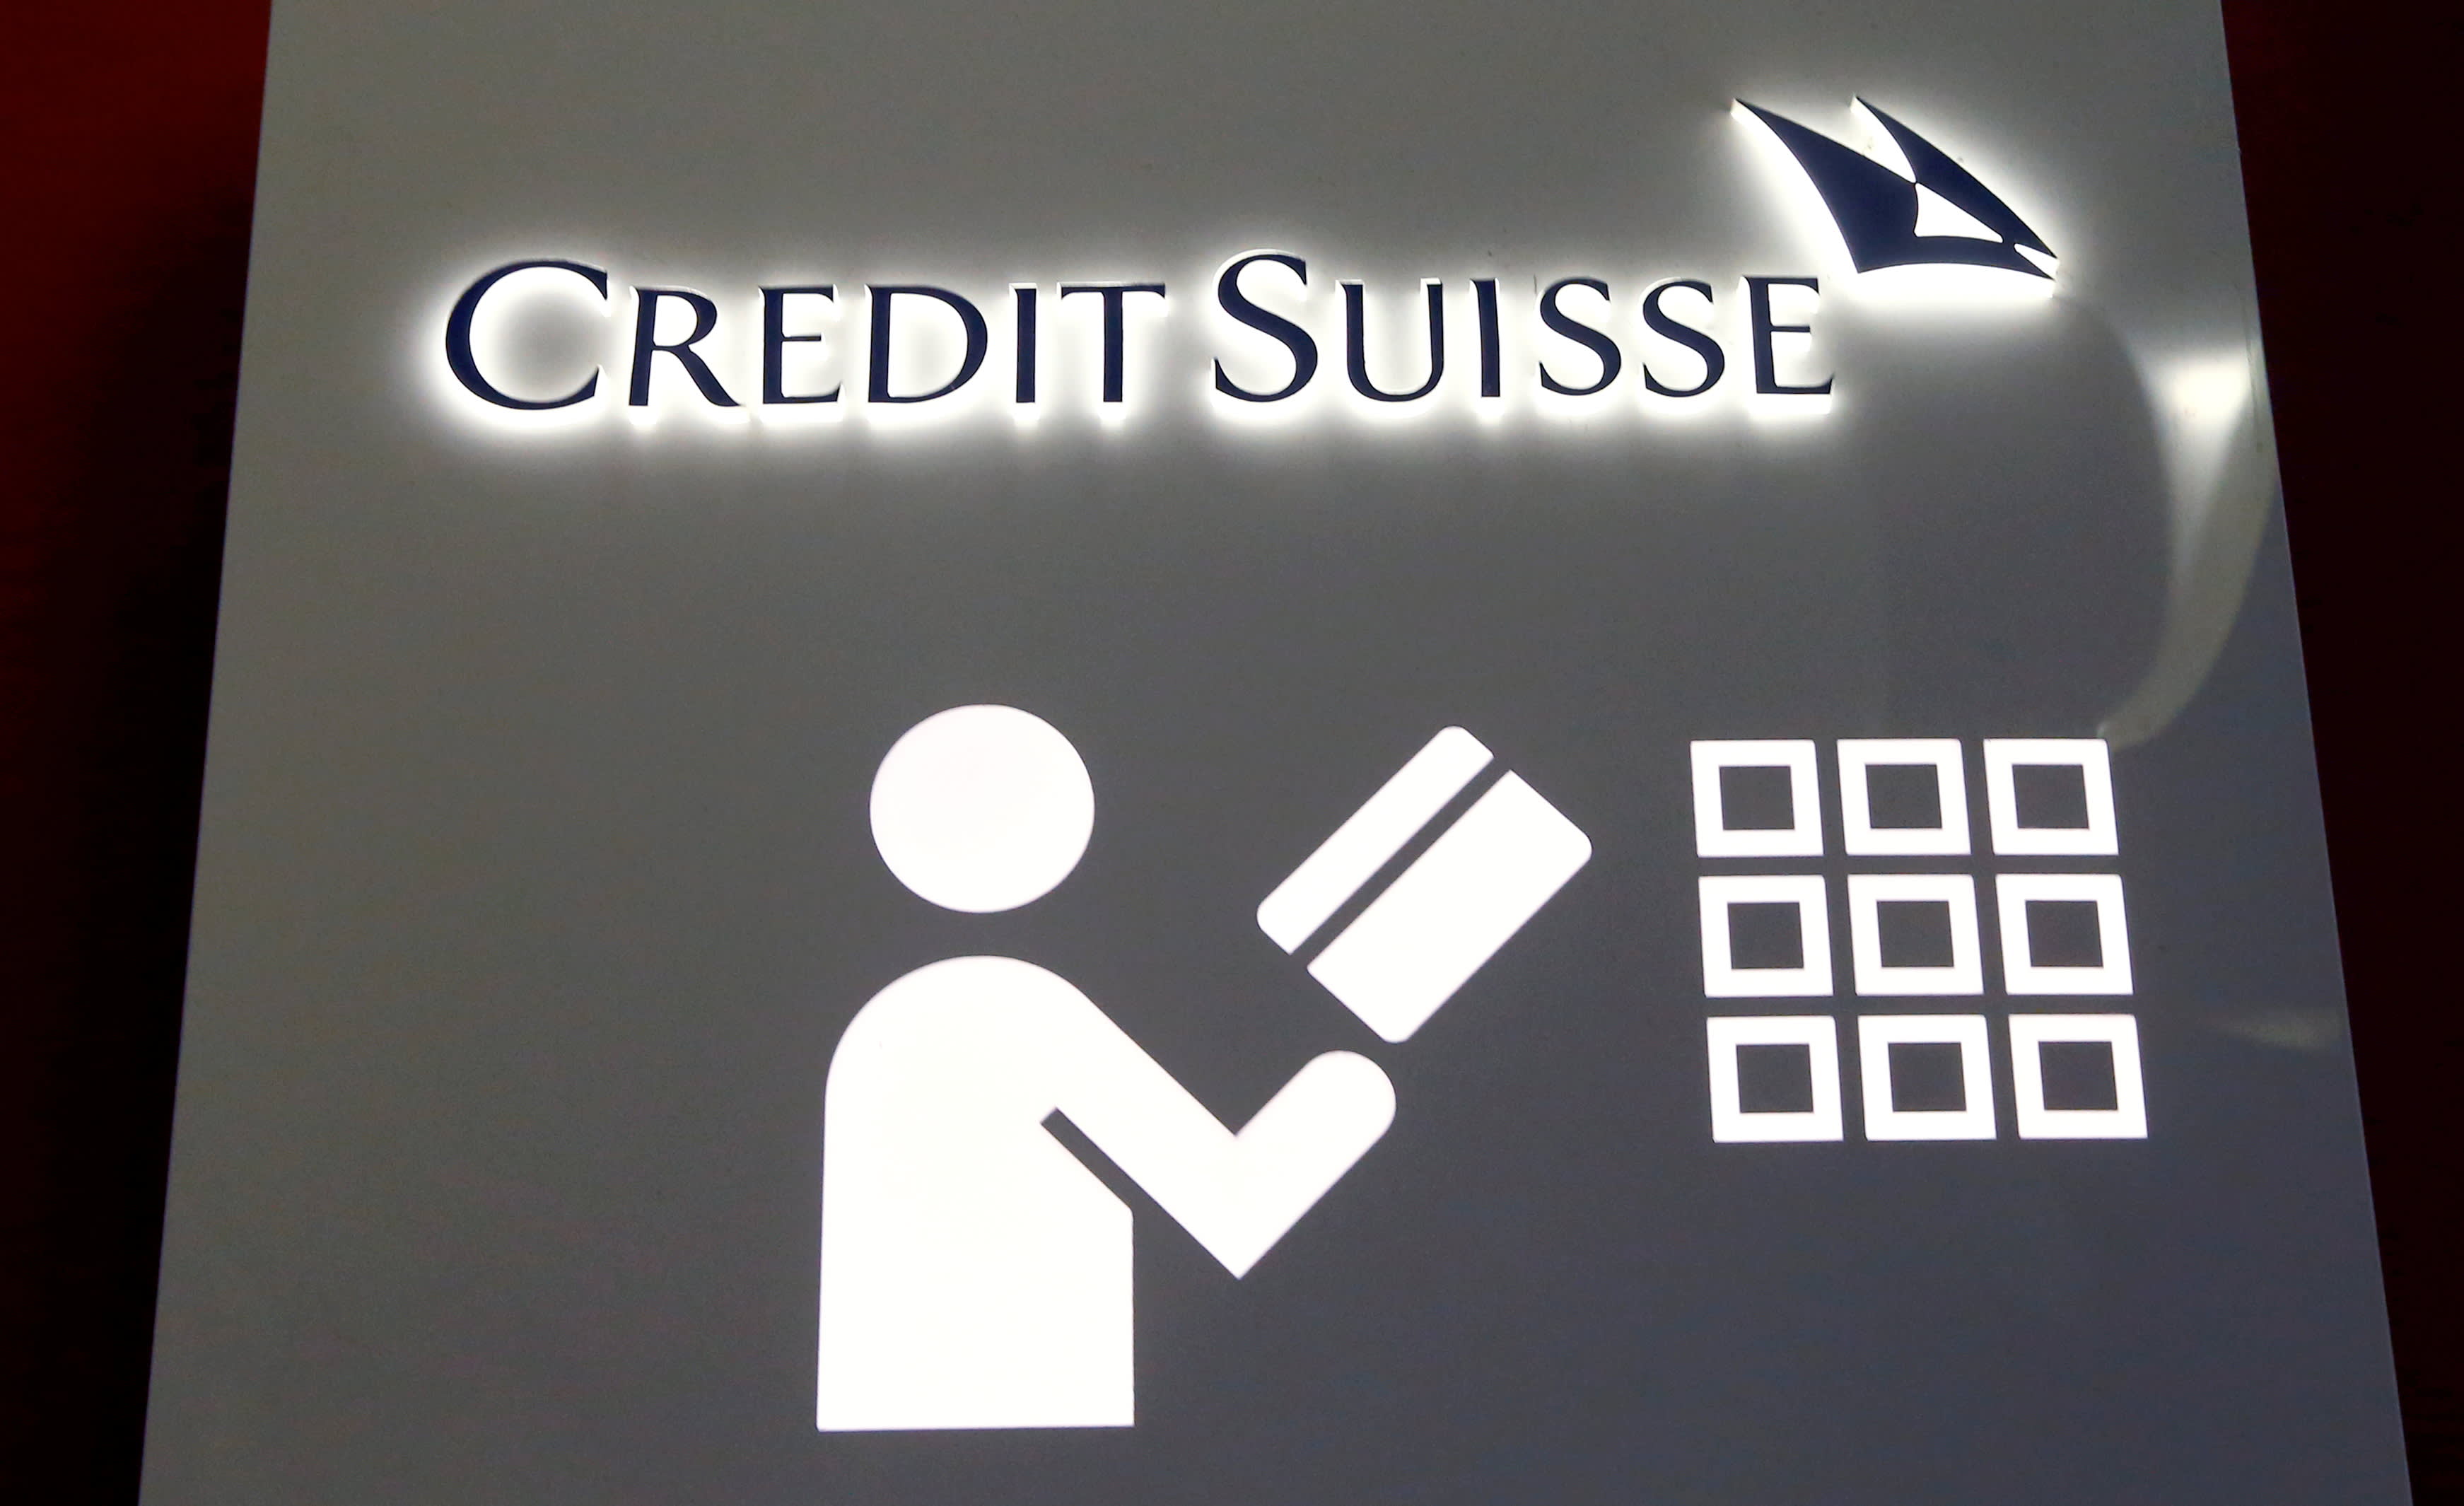 Credit Suisse chairman says Silicon Valley banking crisis contained